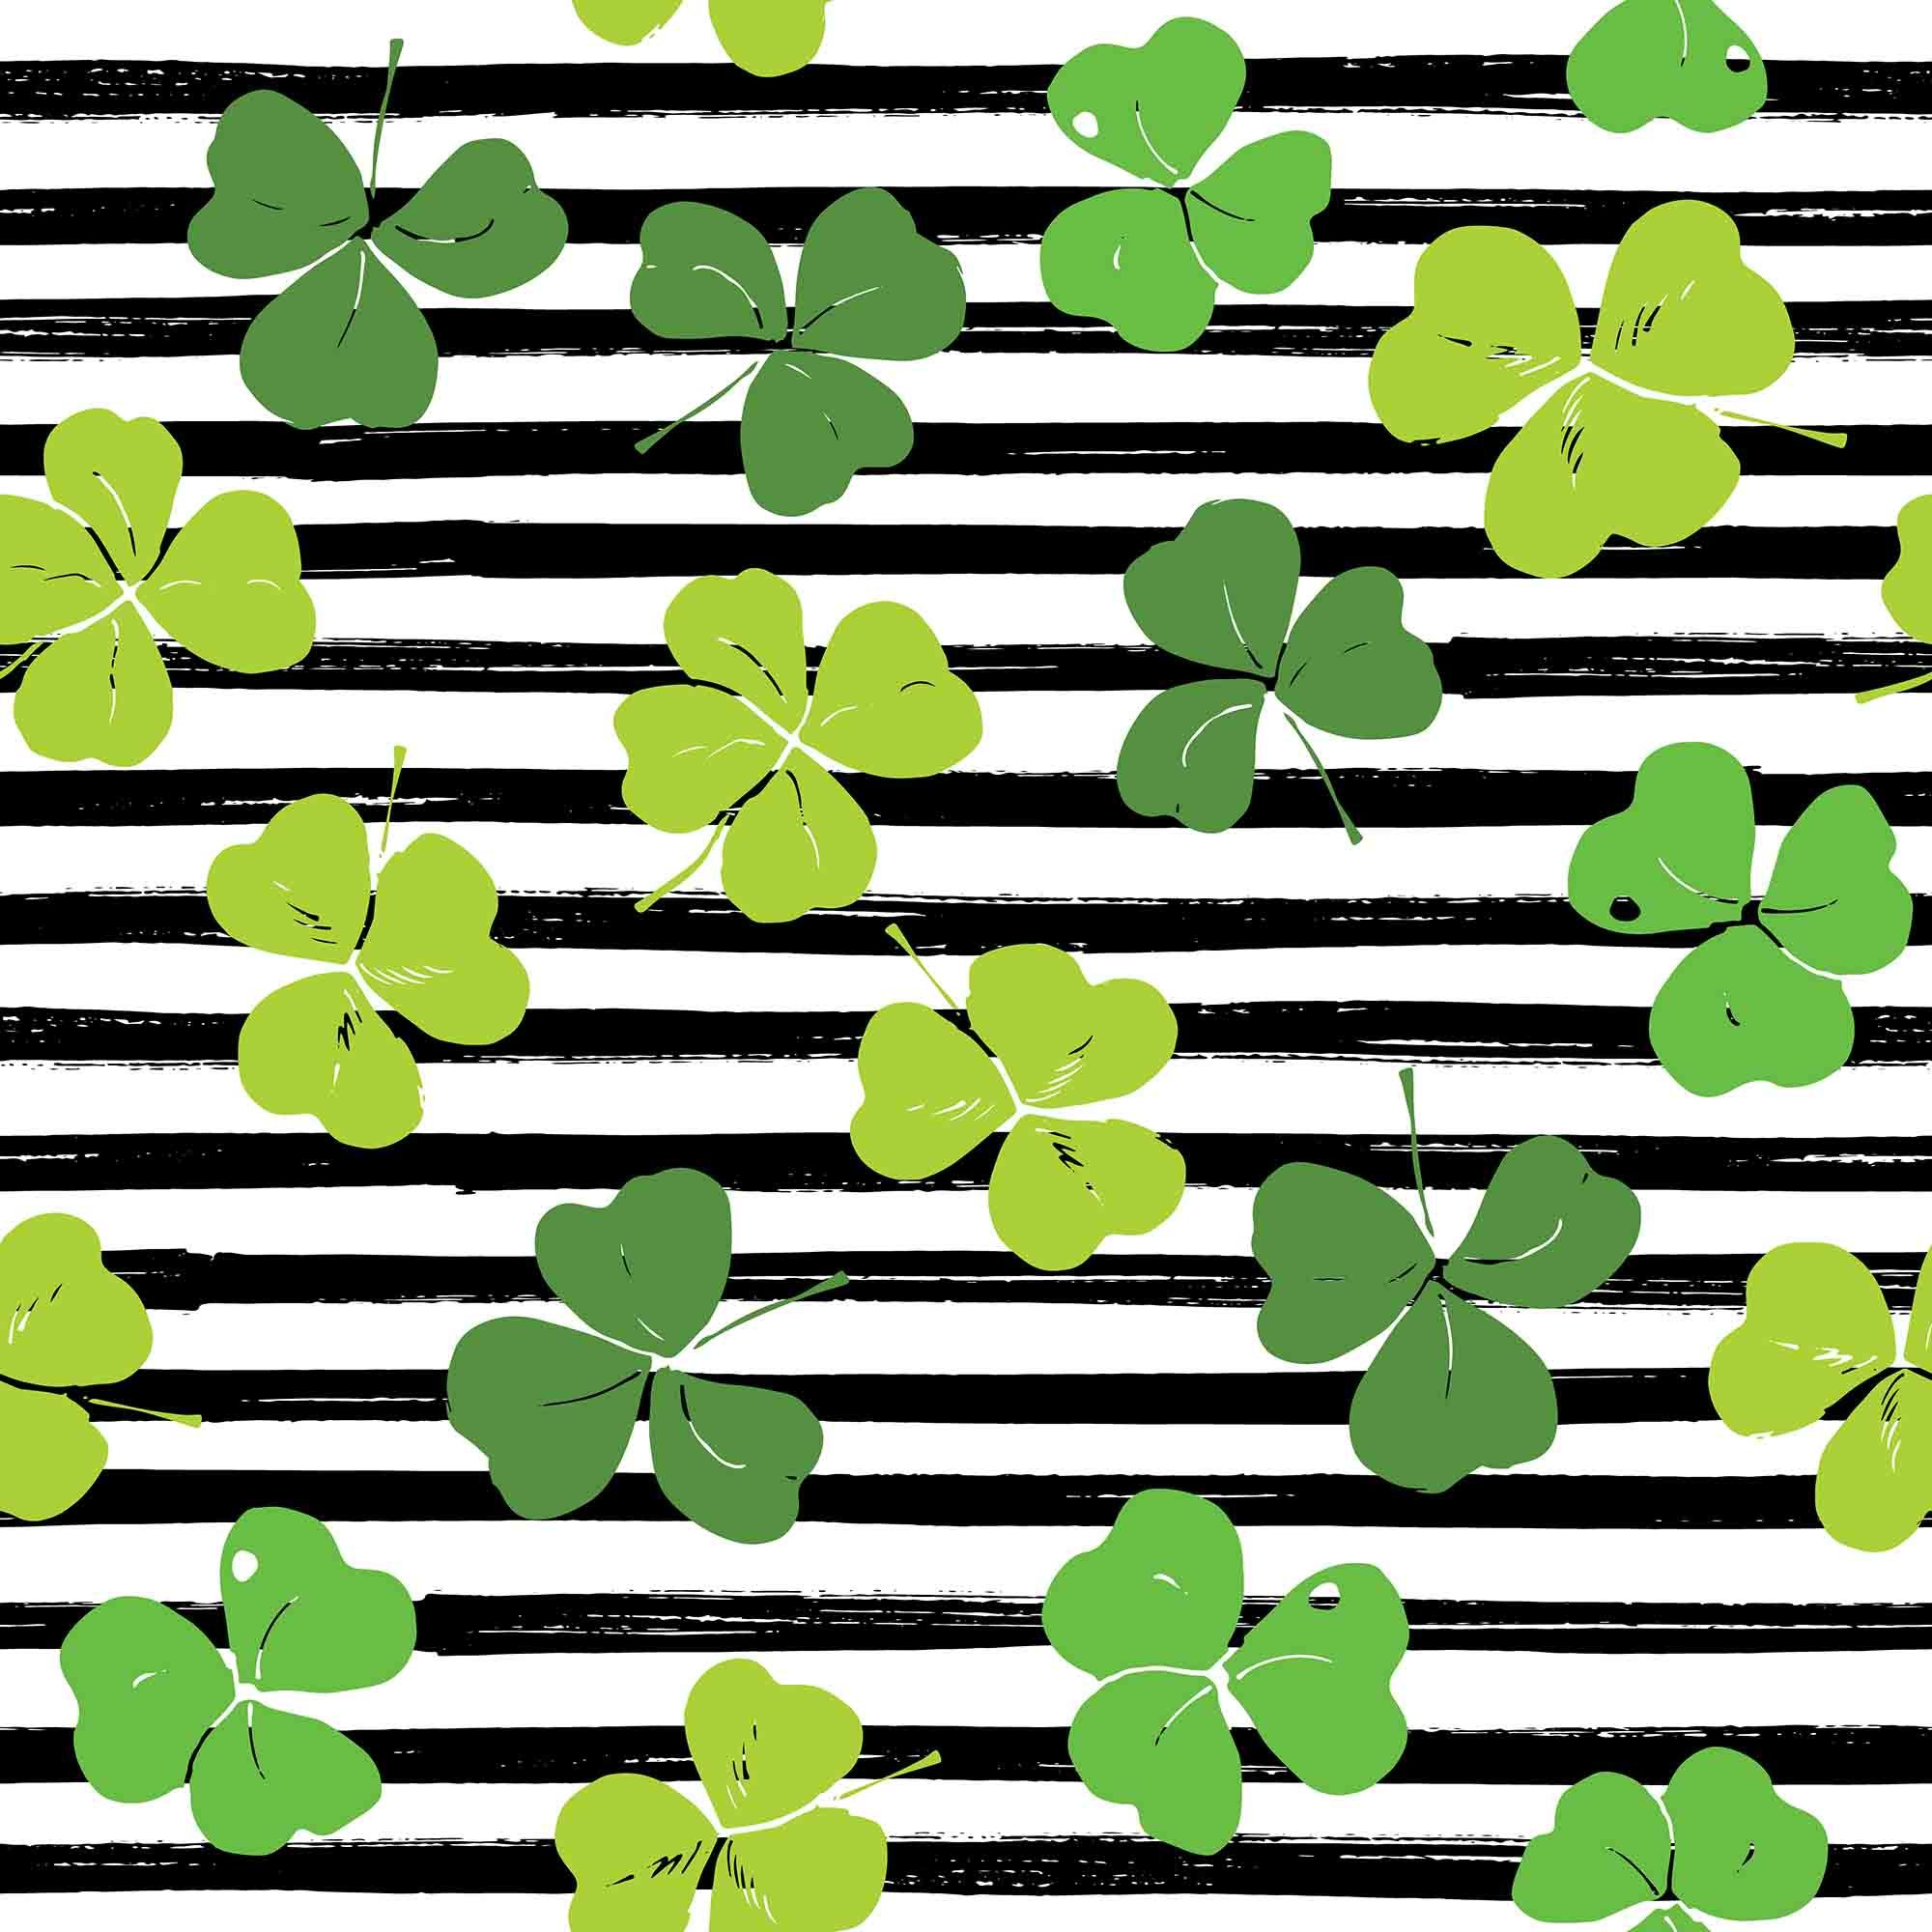 Green Clovers Draw On Black Strips For Saint Patrick's Day Photography Backdrop Shopbackdrop